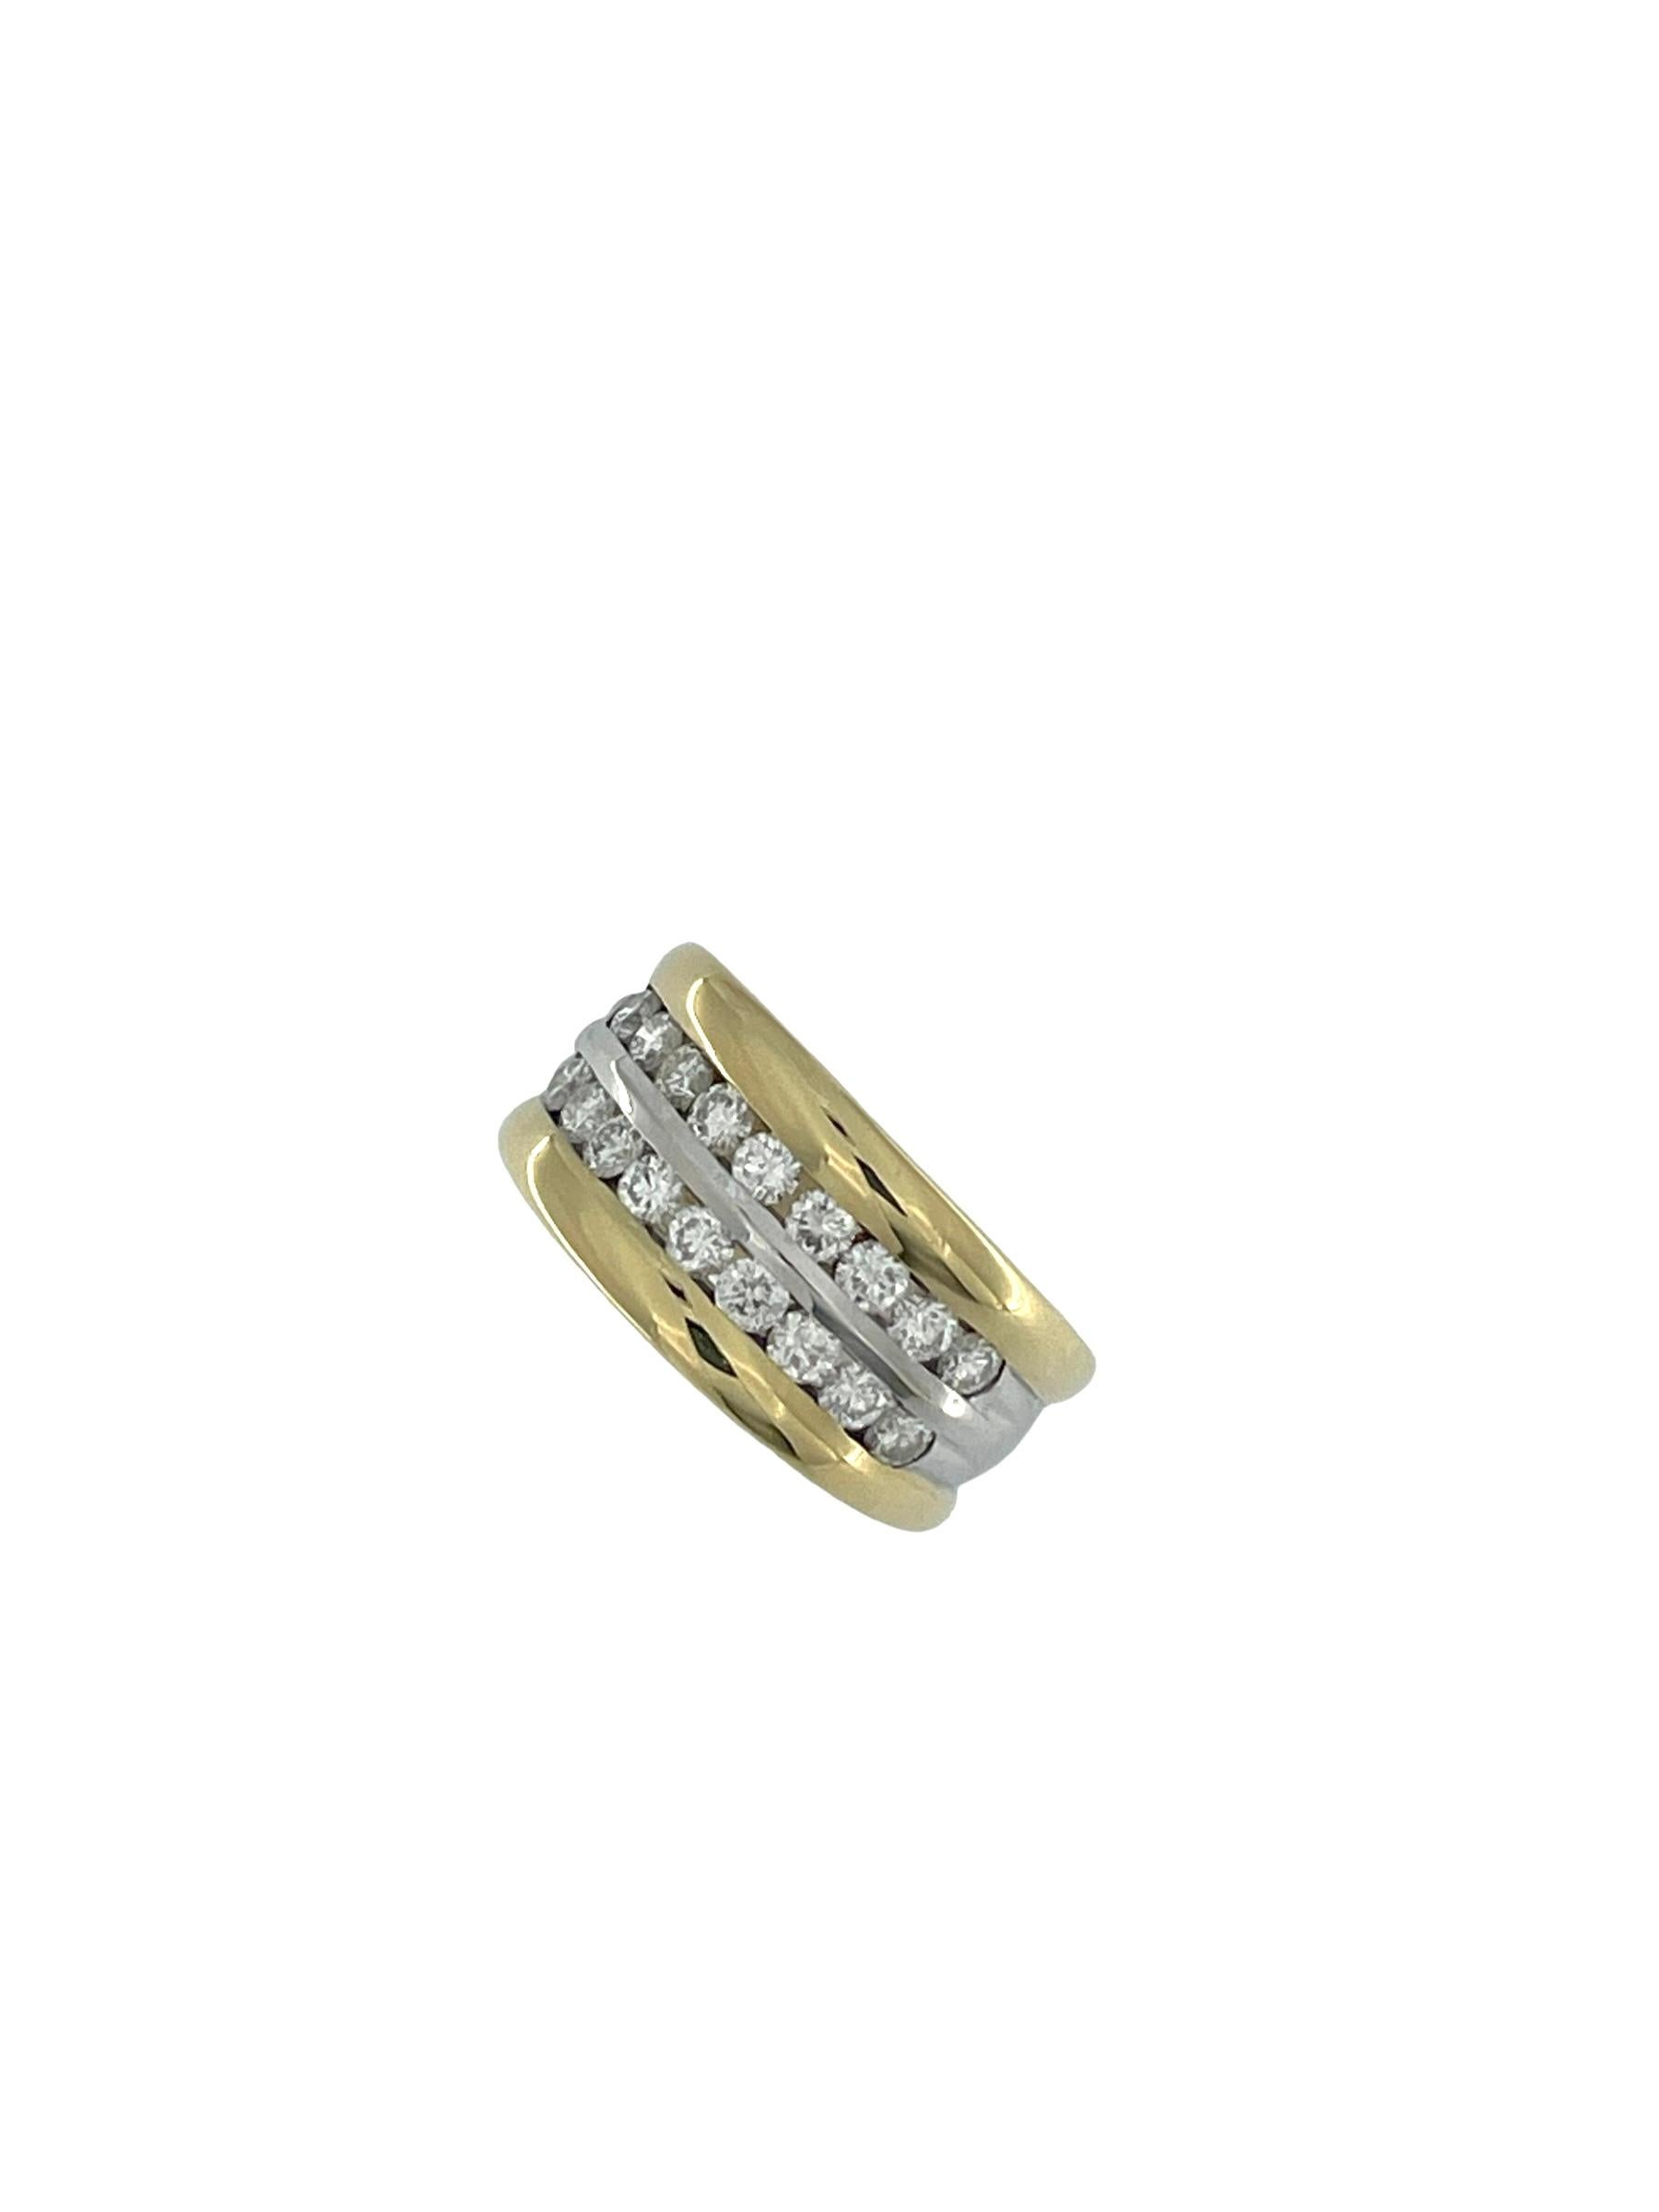 Women's or Men's HRD Certified Diamonds Yellow and White Gold Band Ring For Sale